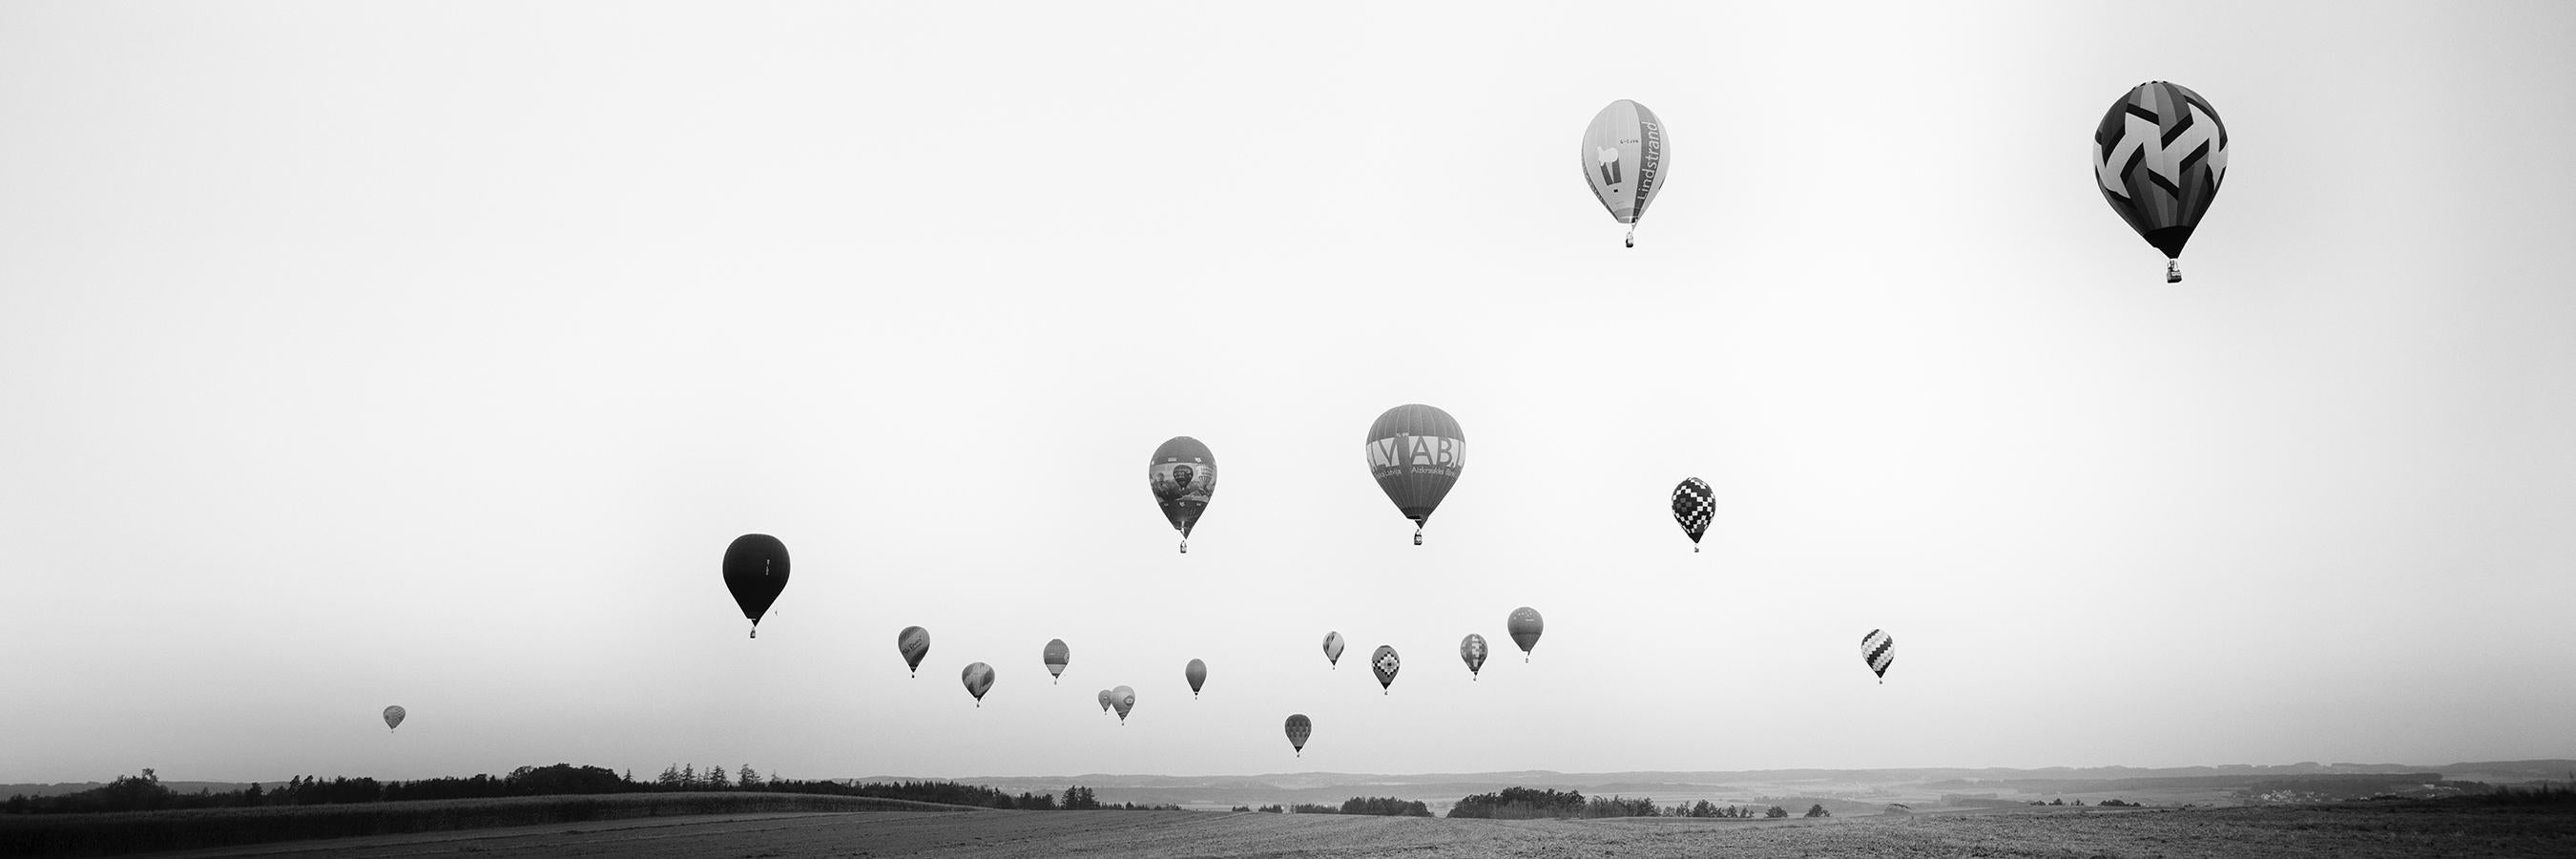 Gerald Berghammer Black and White Photograph - Hot Air Balloon Panorama, World Championship, black white landscape photography